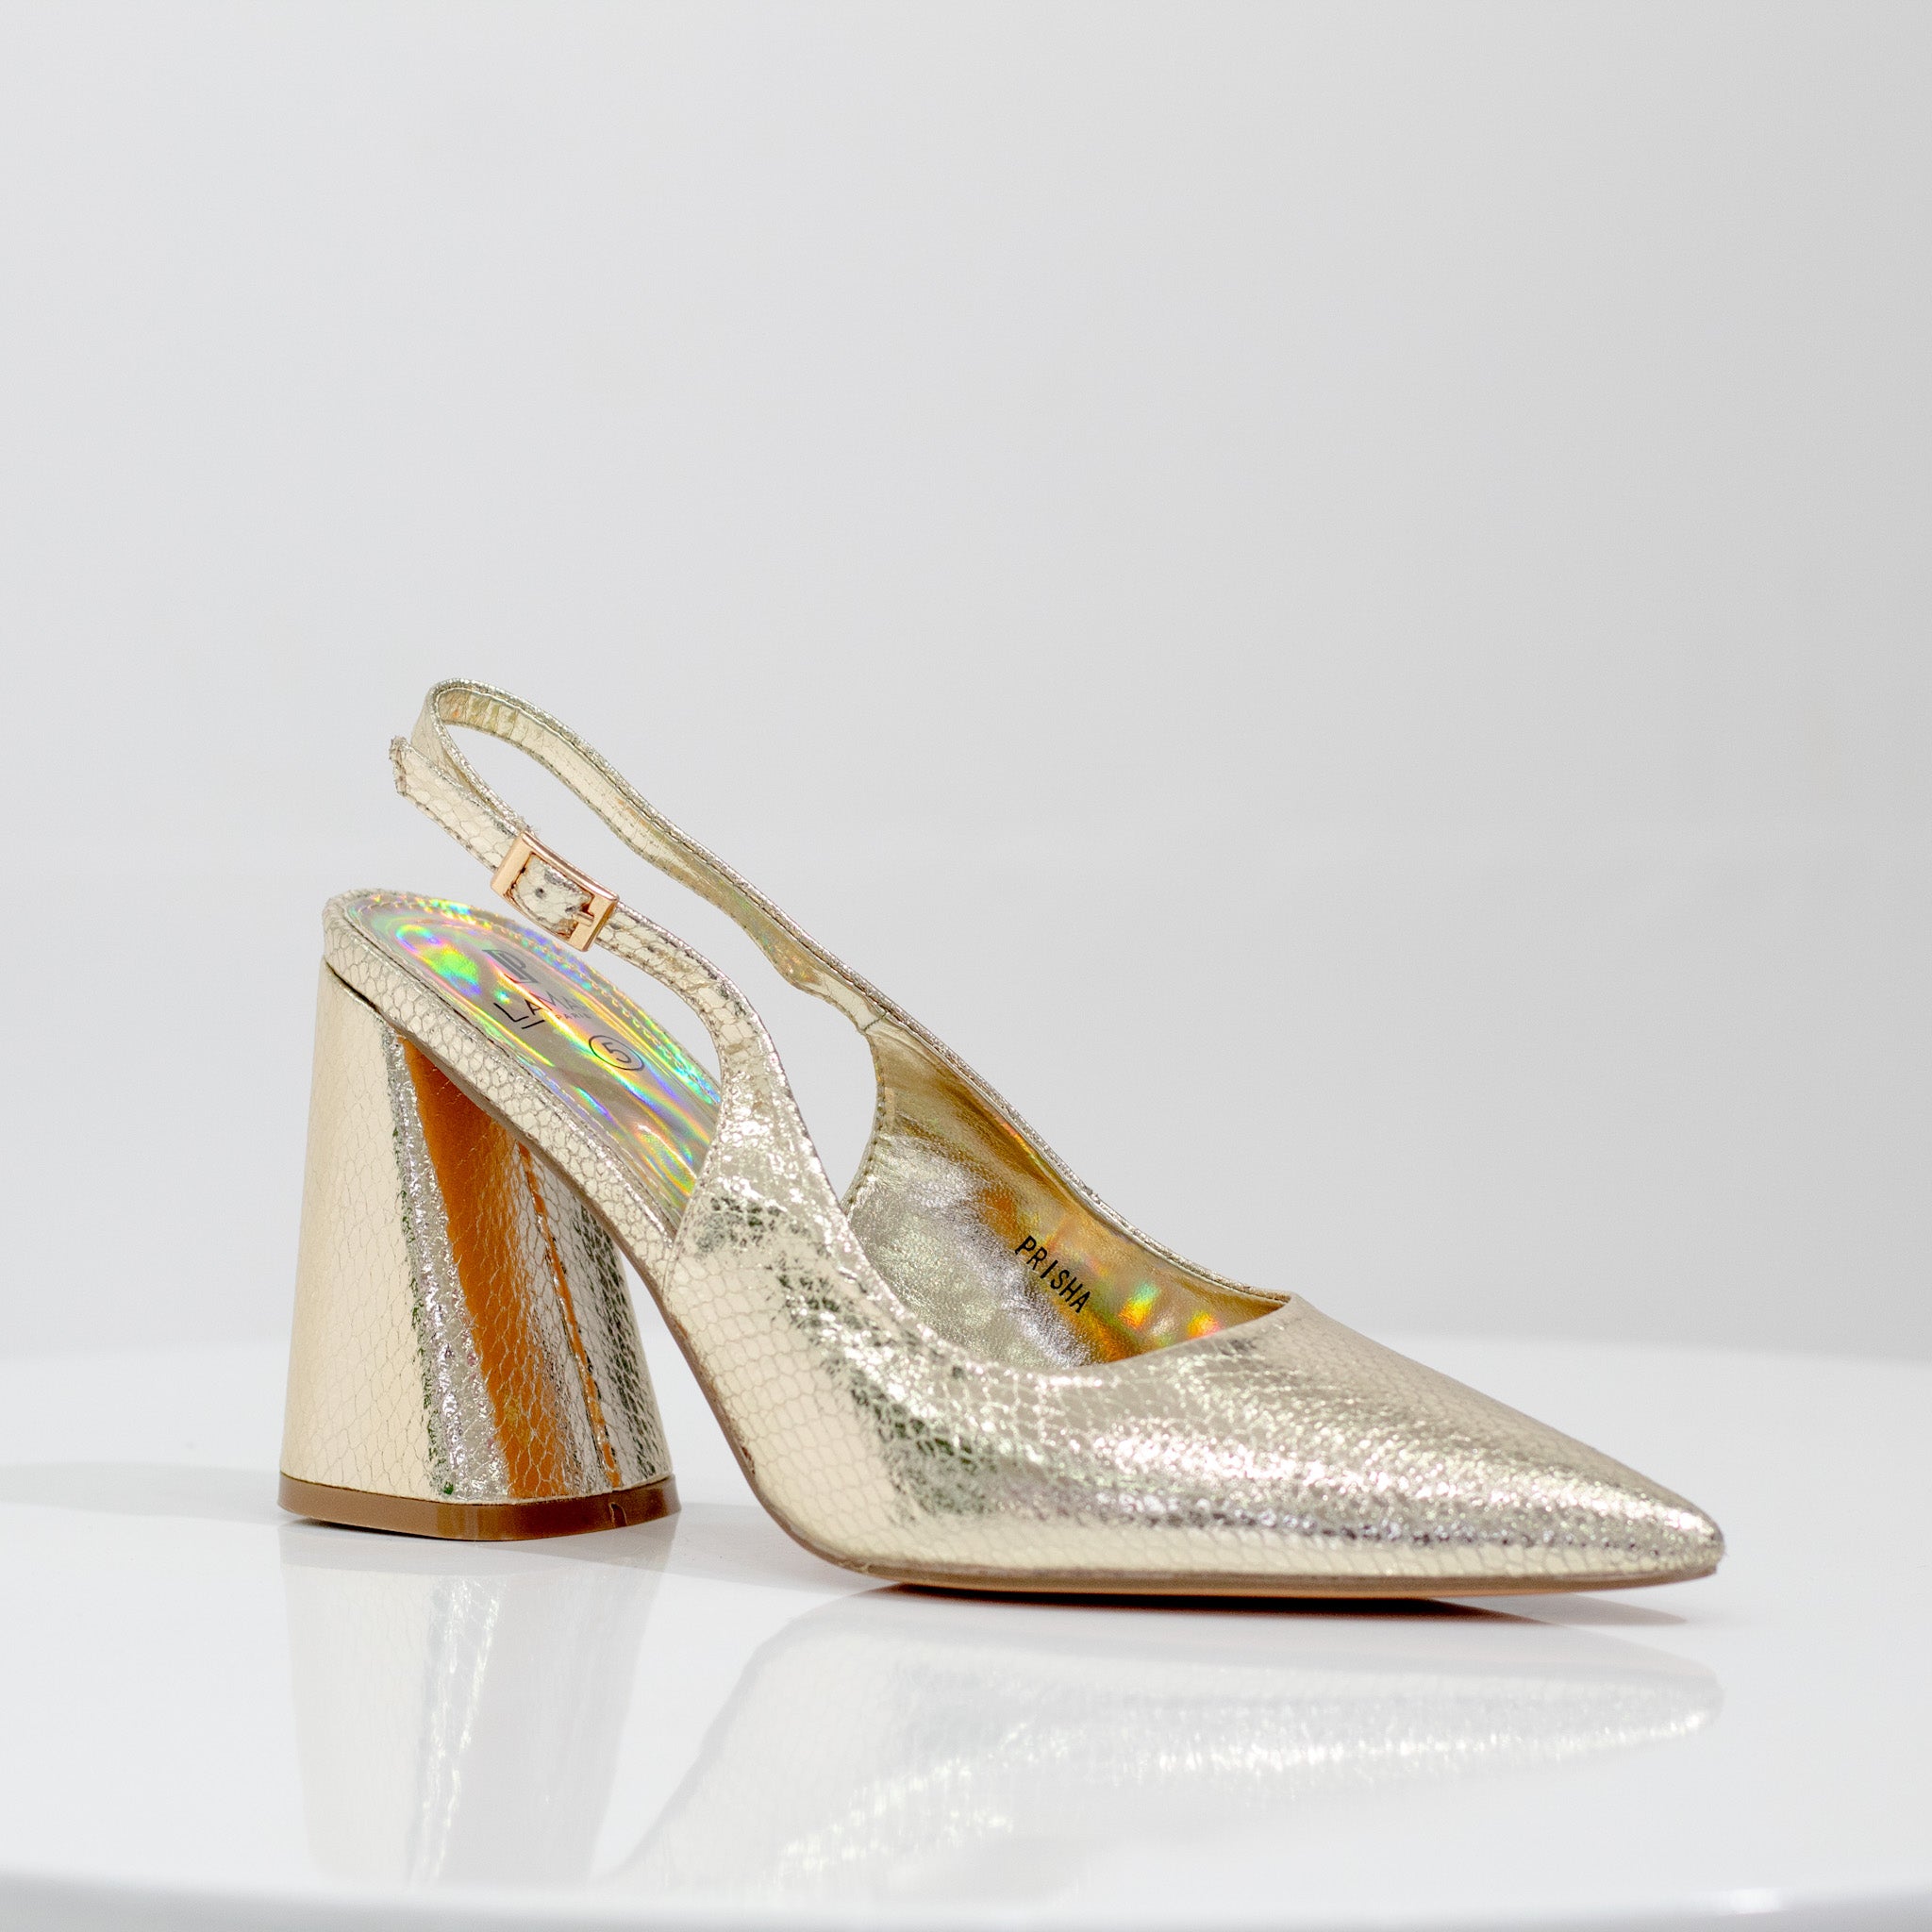 pointy sling back on a block heel gold